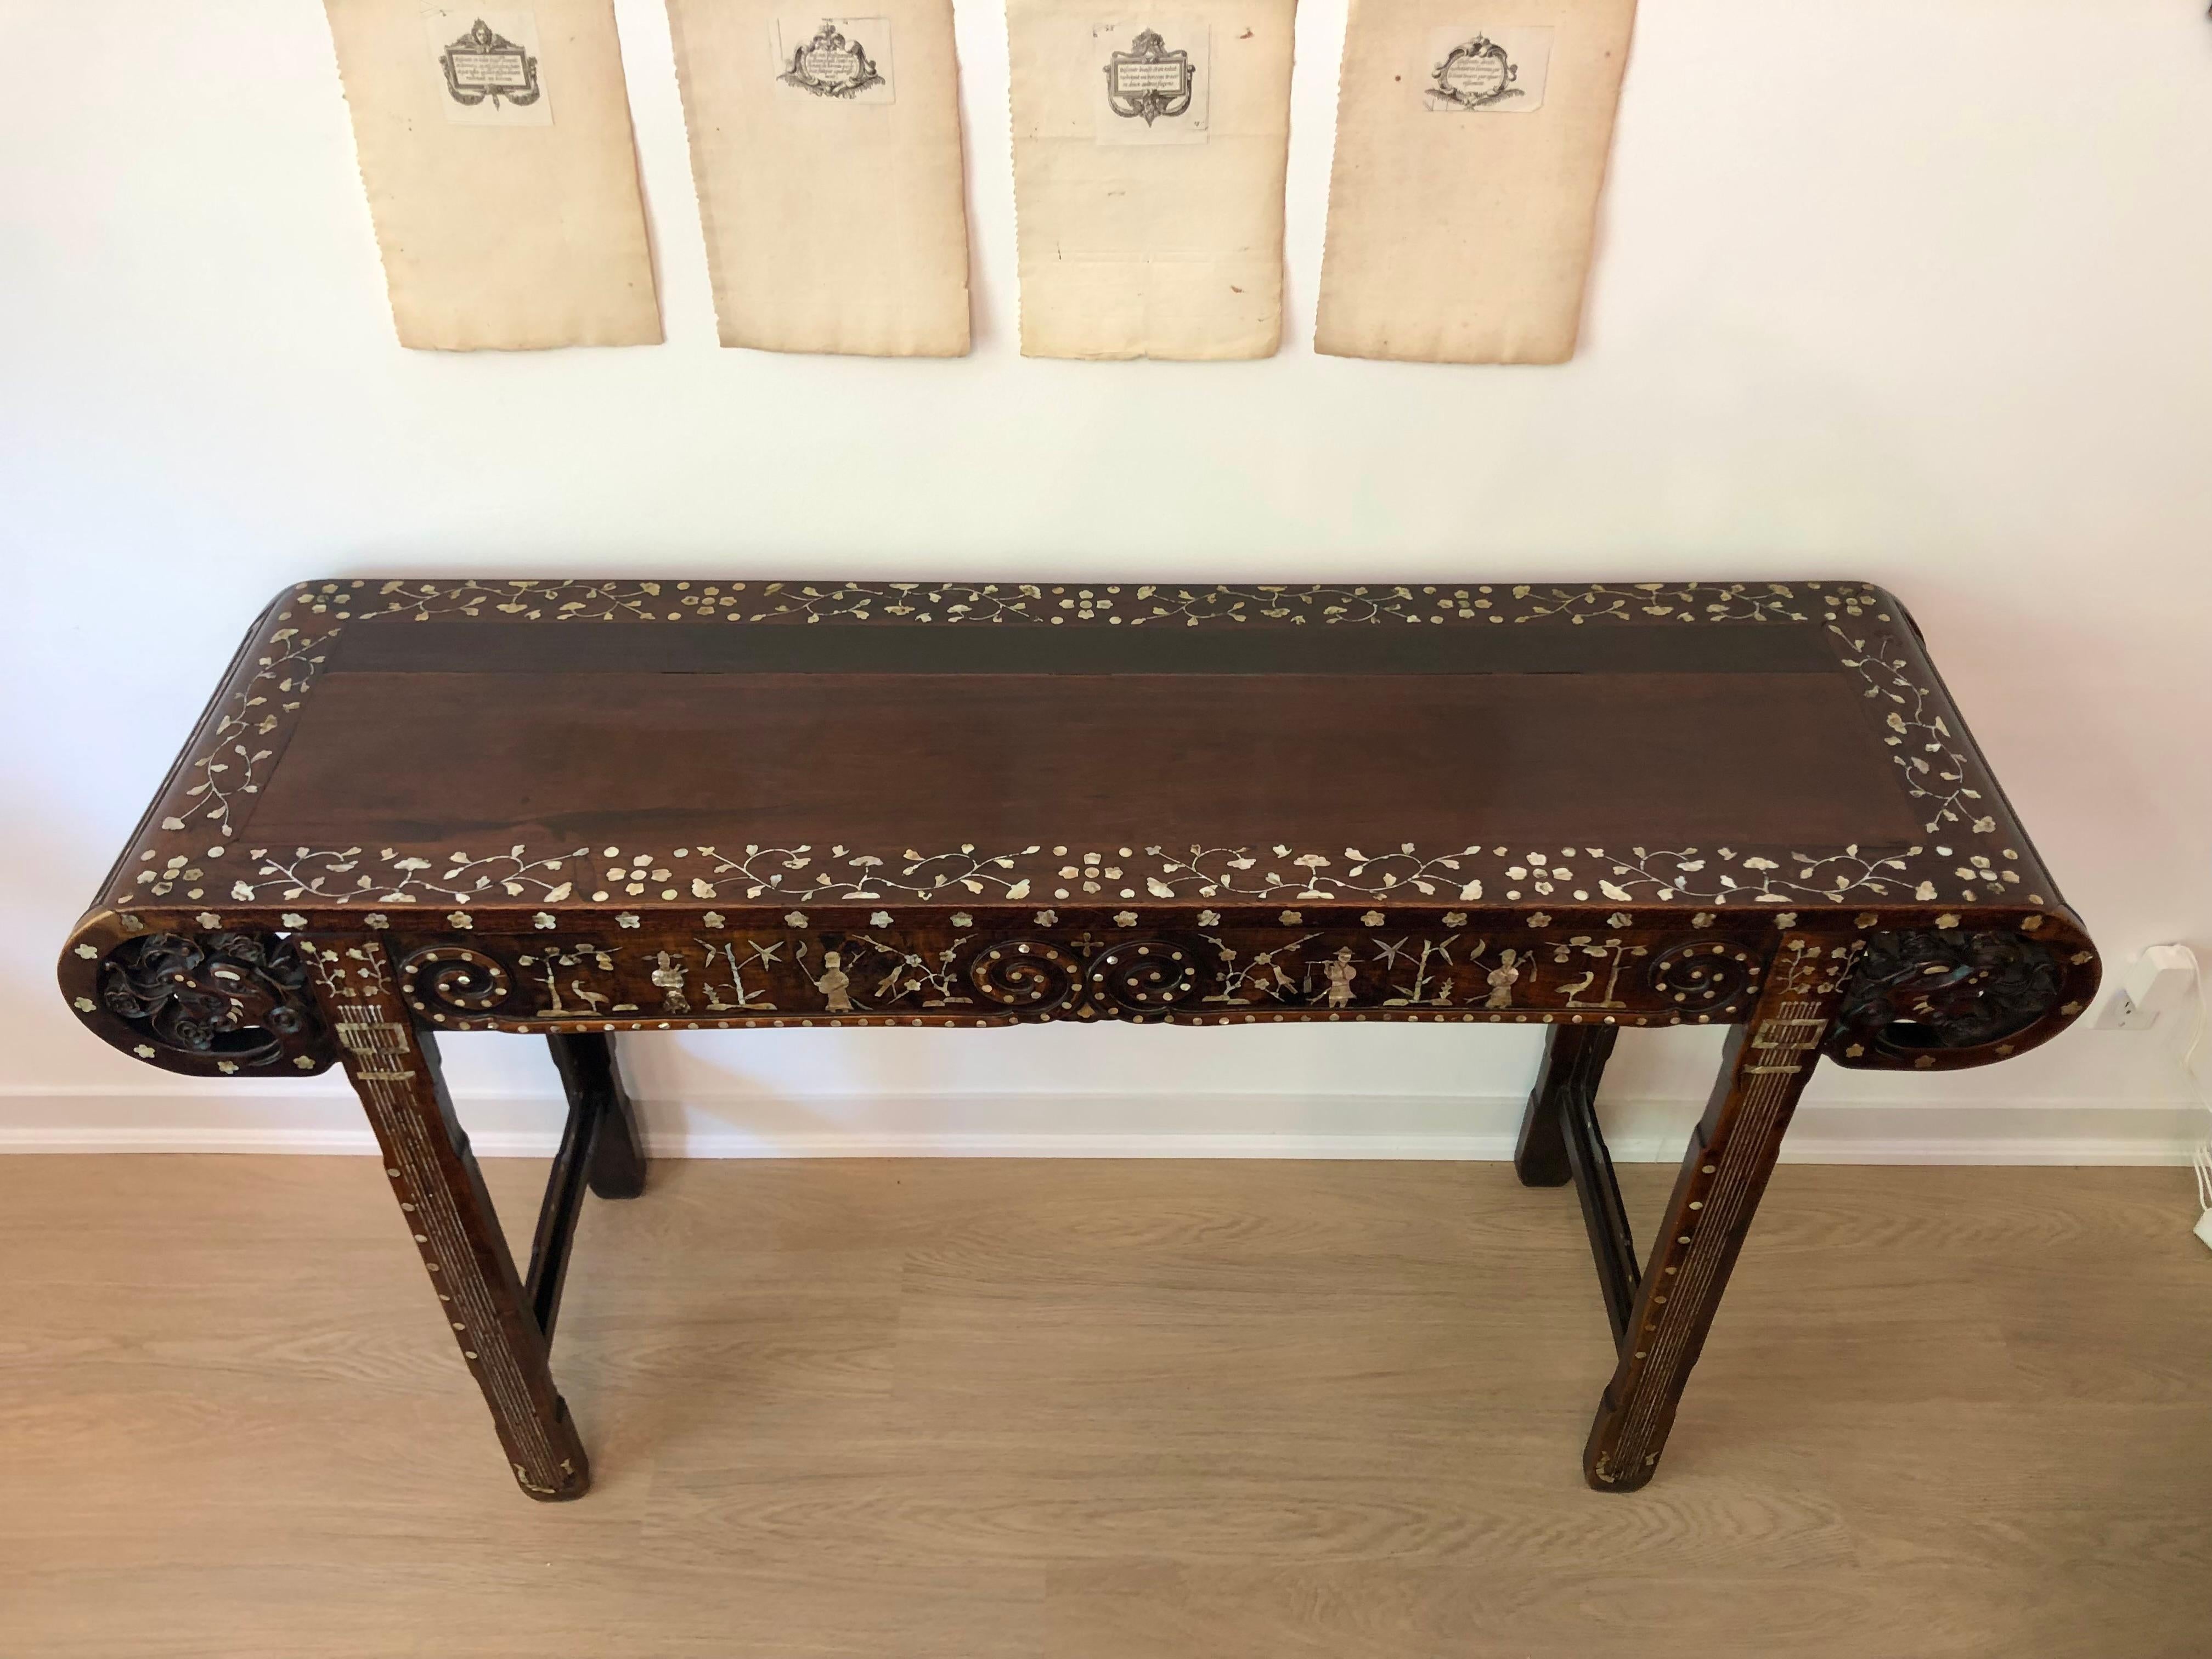 This is a gorgeous late Qing Dynasty Chinese altar table made of Rosewood. Scroll ends carved with dragons and beautiful mother-of-pearl inlay on all sides, including top, back, legs and even inner rails. The top inlaid with a border of scrolling